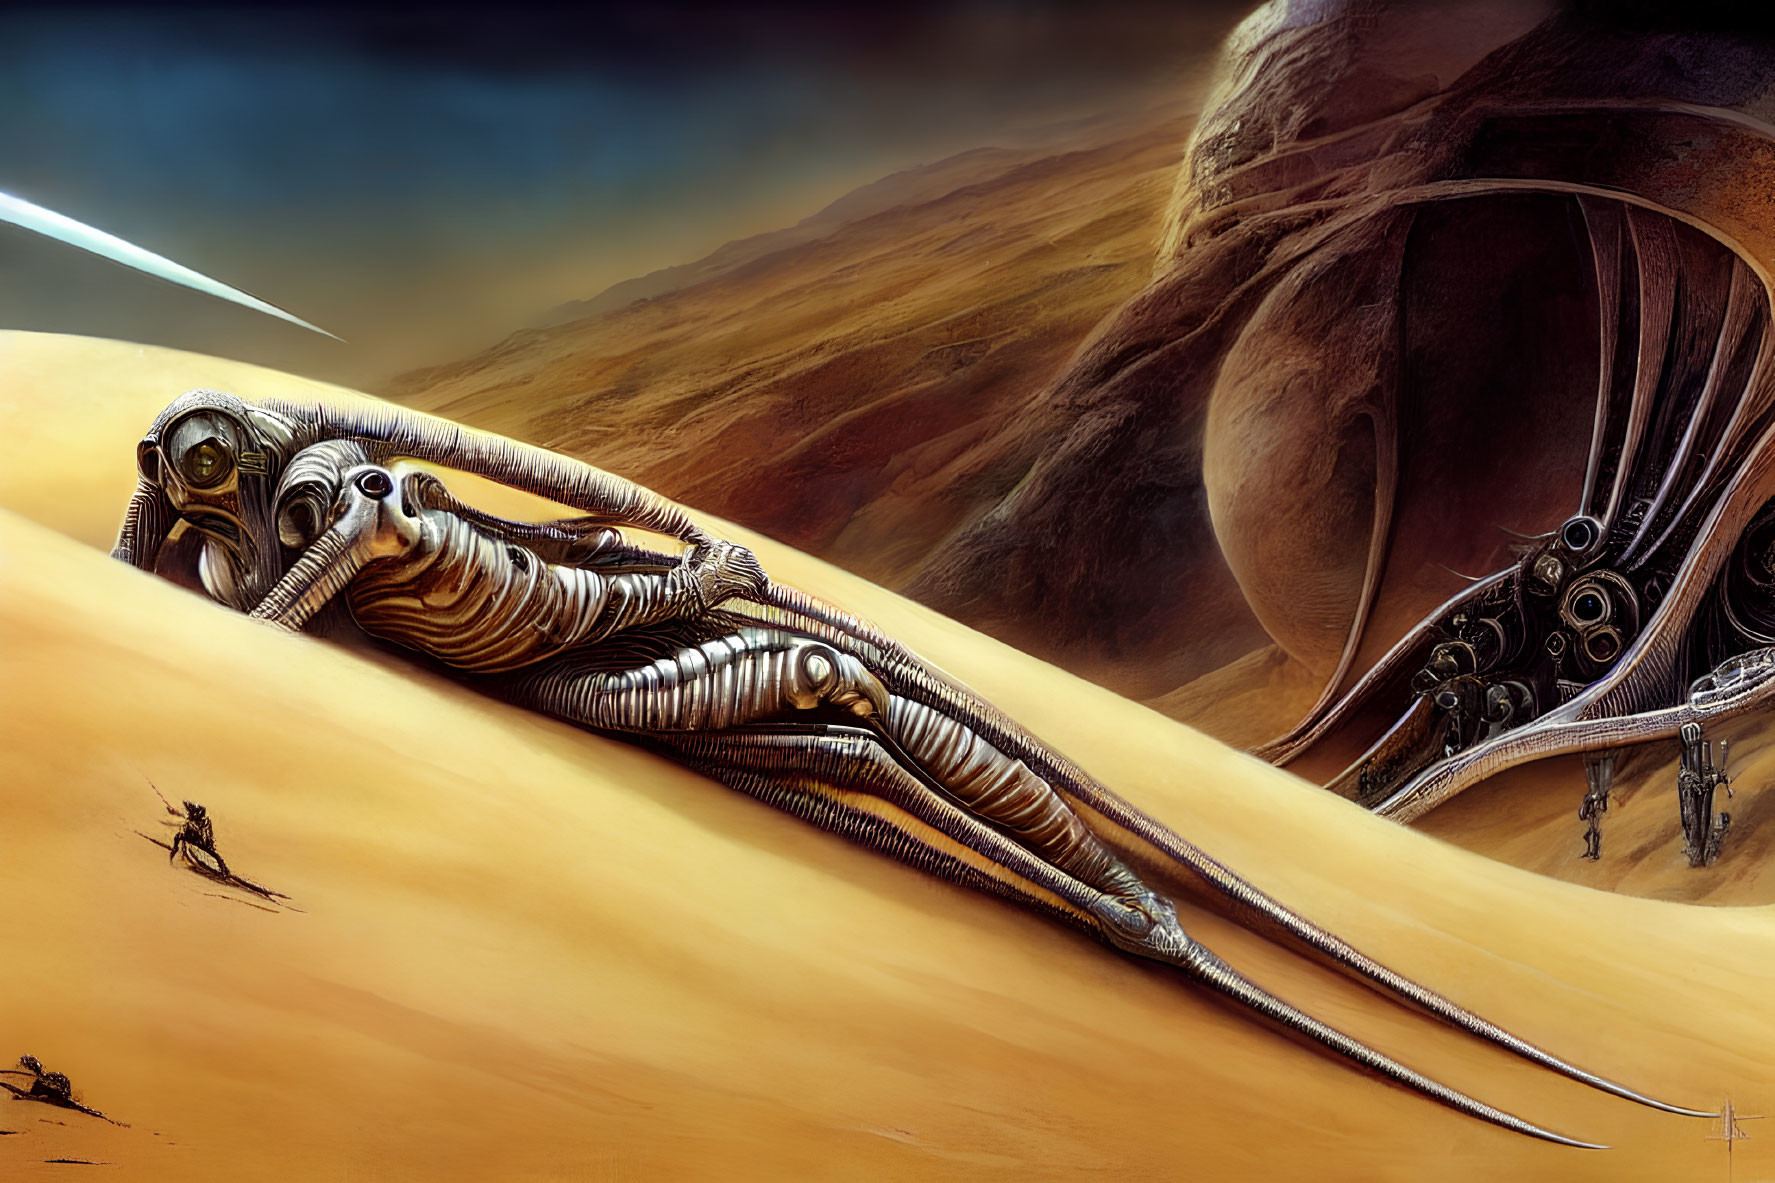 Surreal sci-fi desert landscape with biomechanical alien structures and comet